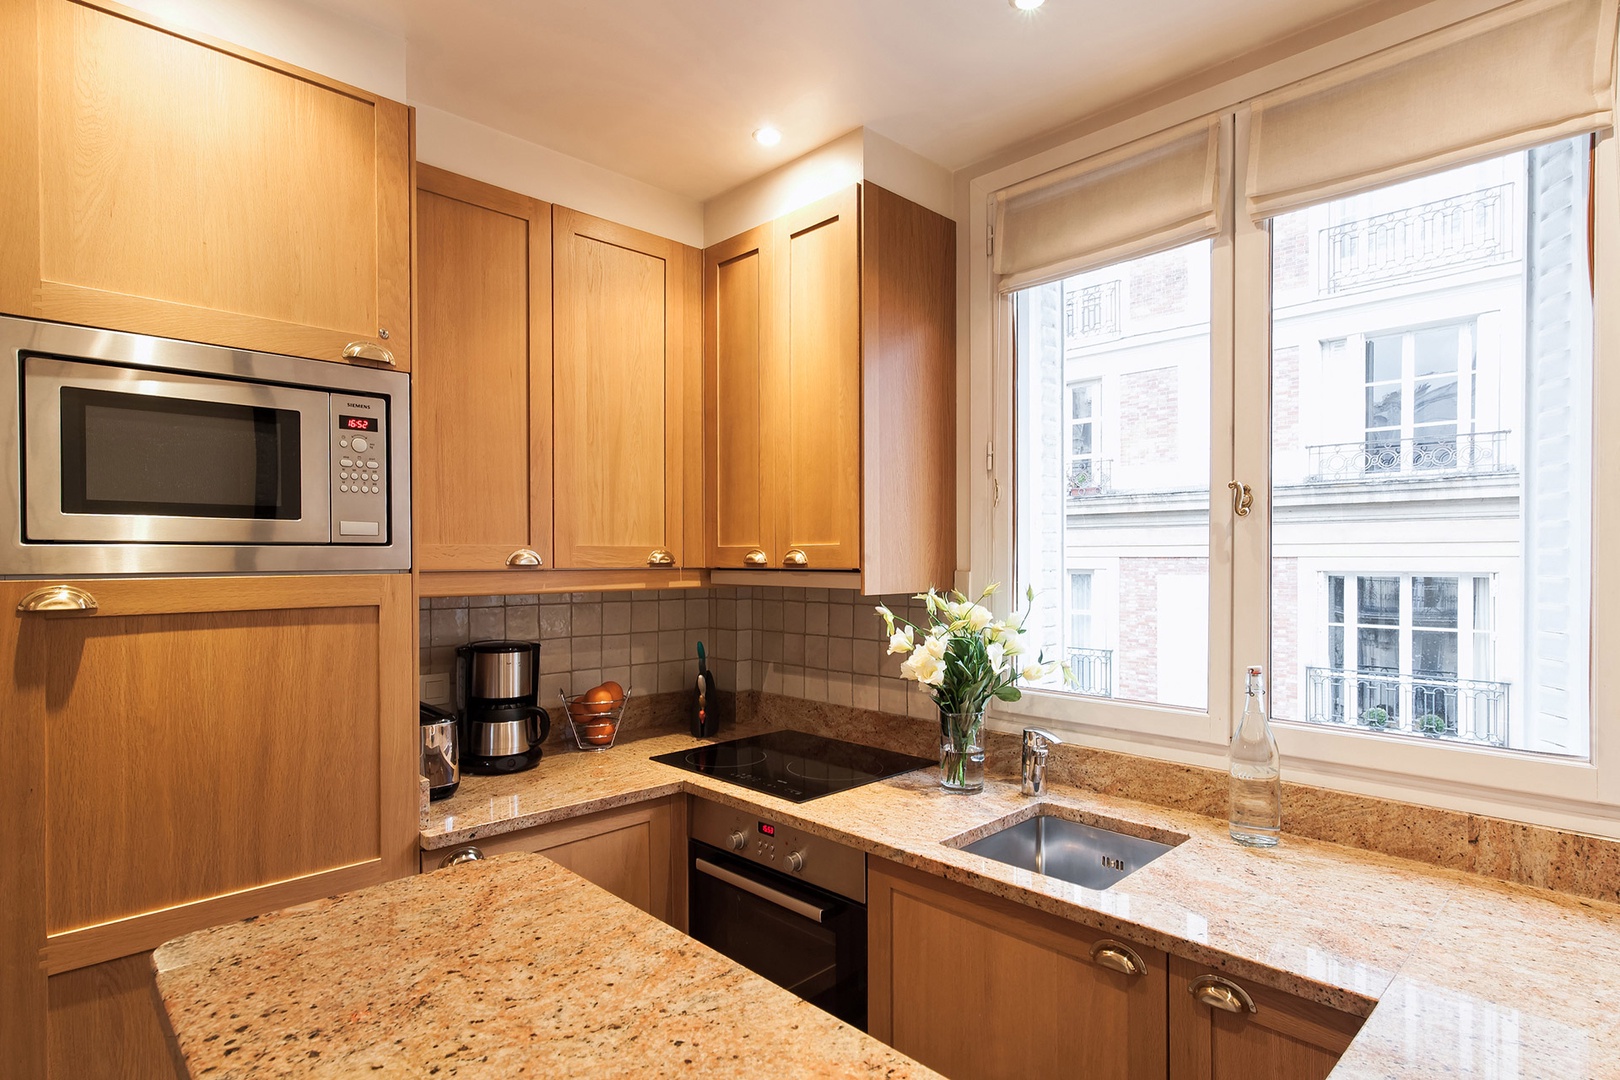 The kitchen is fully-equipped with quality appliances.